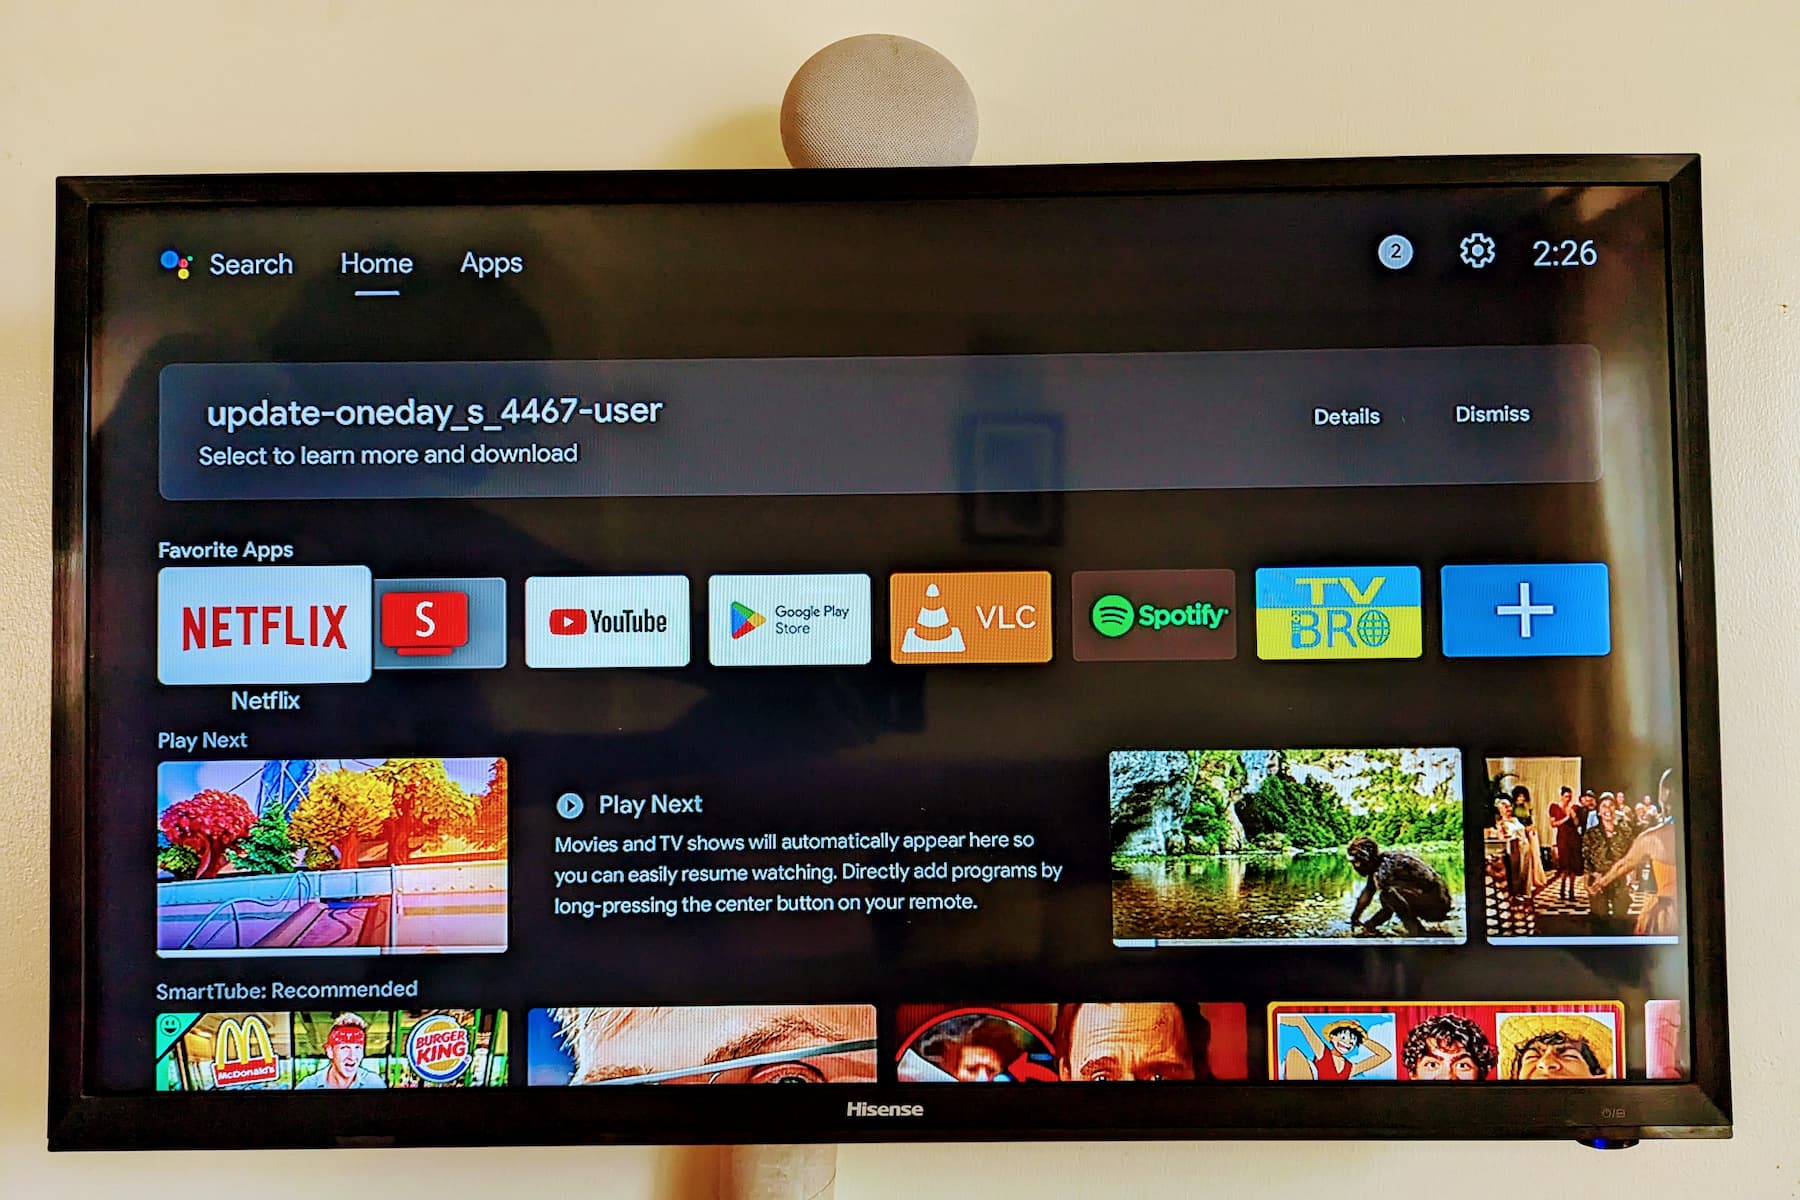 Xiaomi Mi Box S rolls out long overdue Google TV interface for